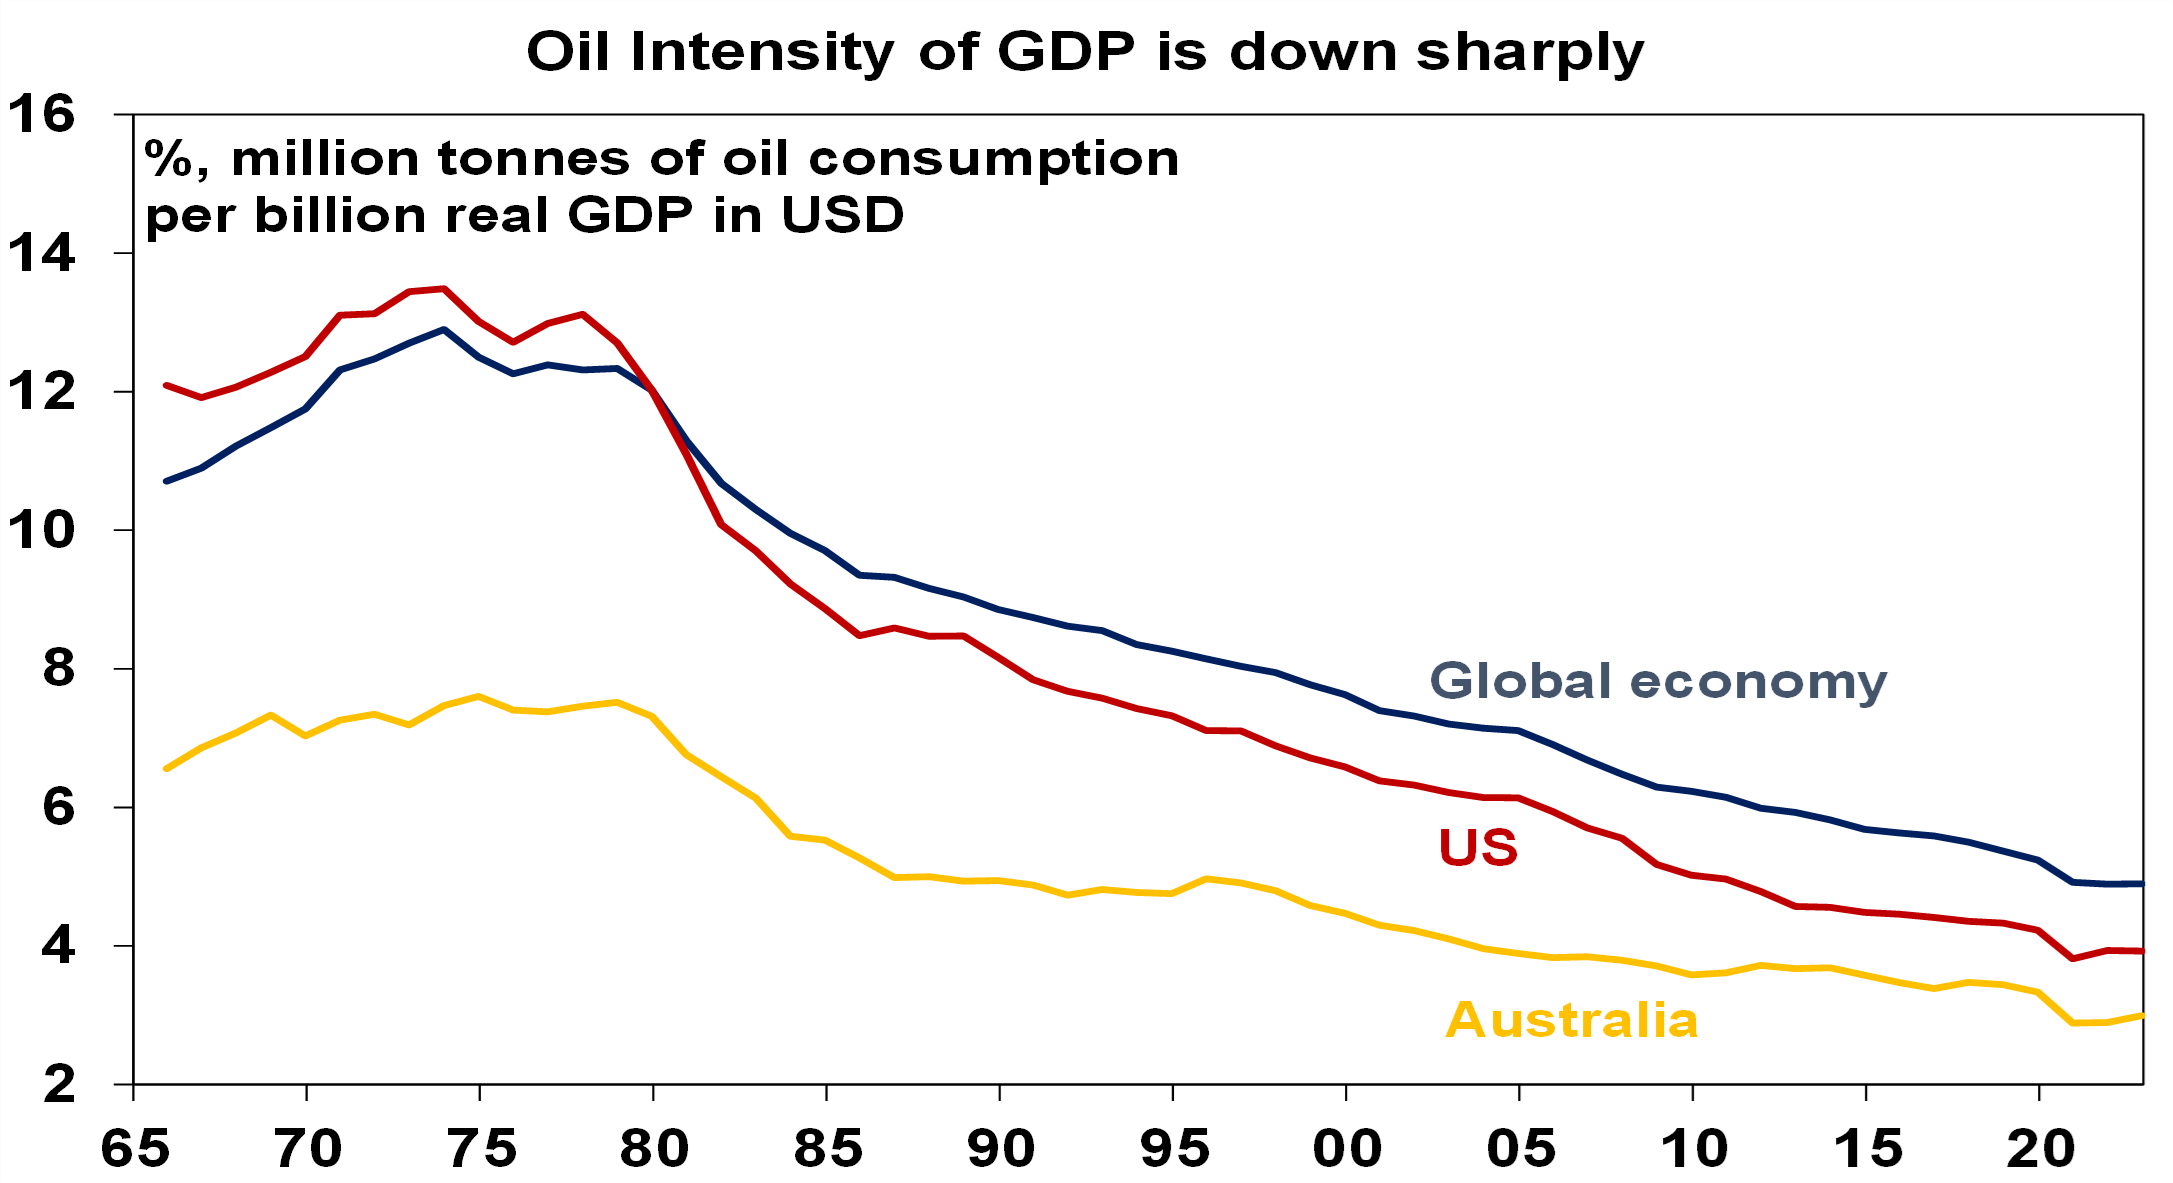 Oil intensity of GDP is down sharply